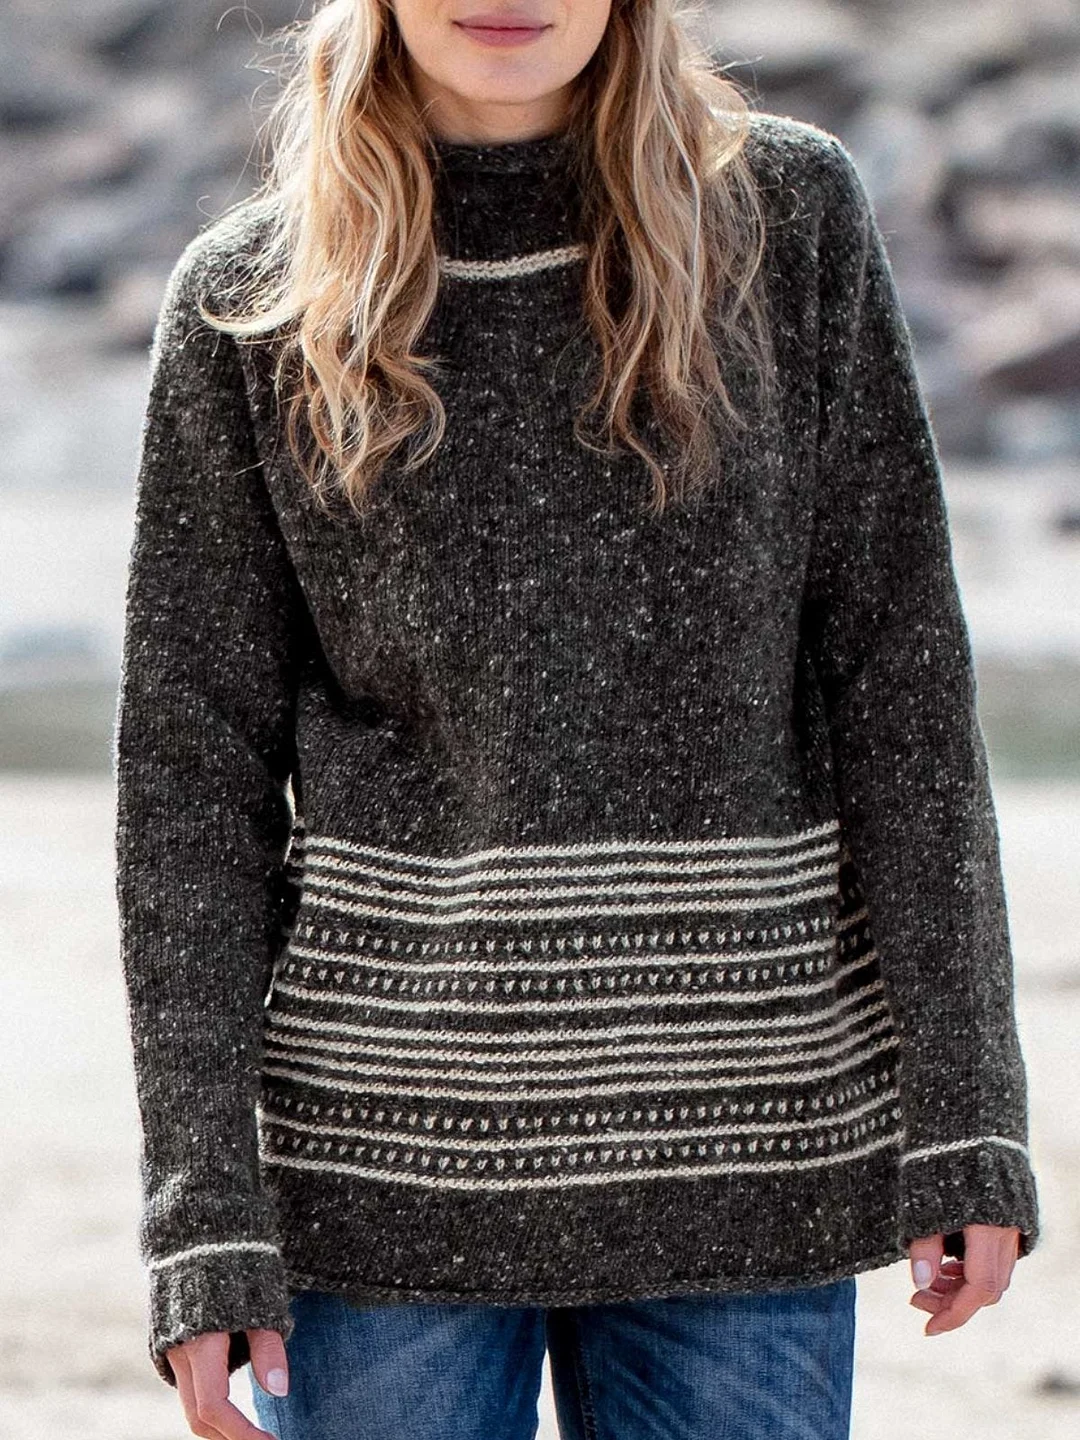 Striped Knitted Casual Sweater